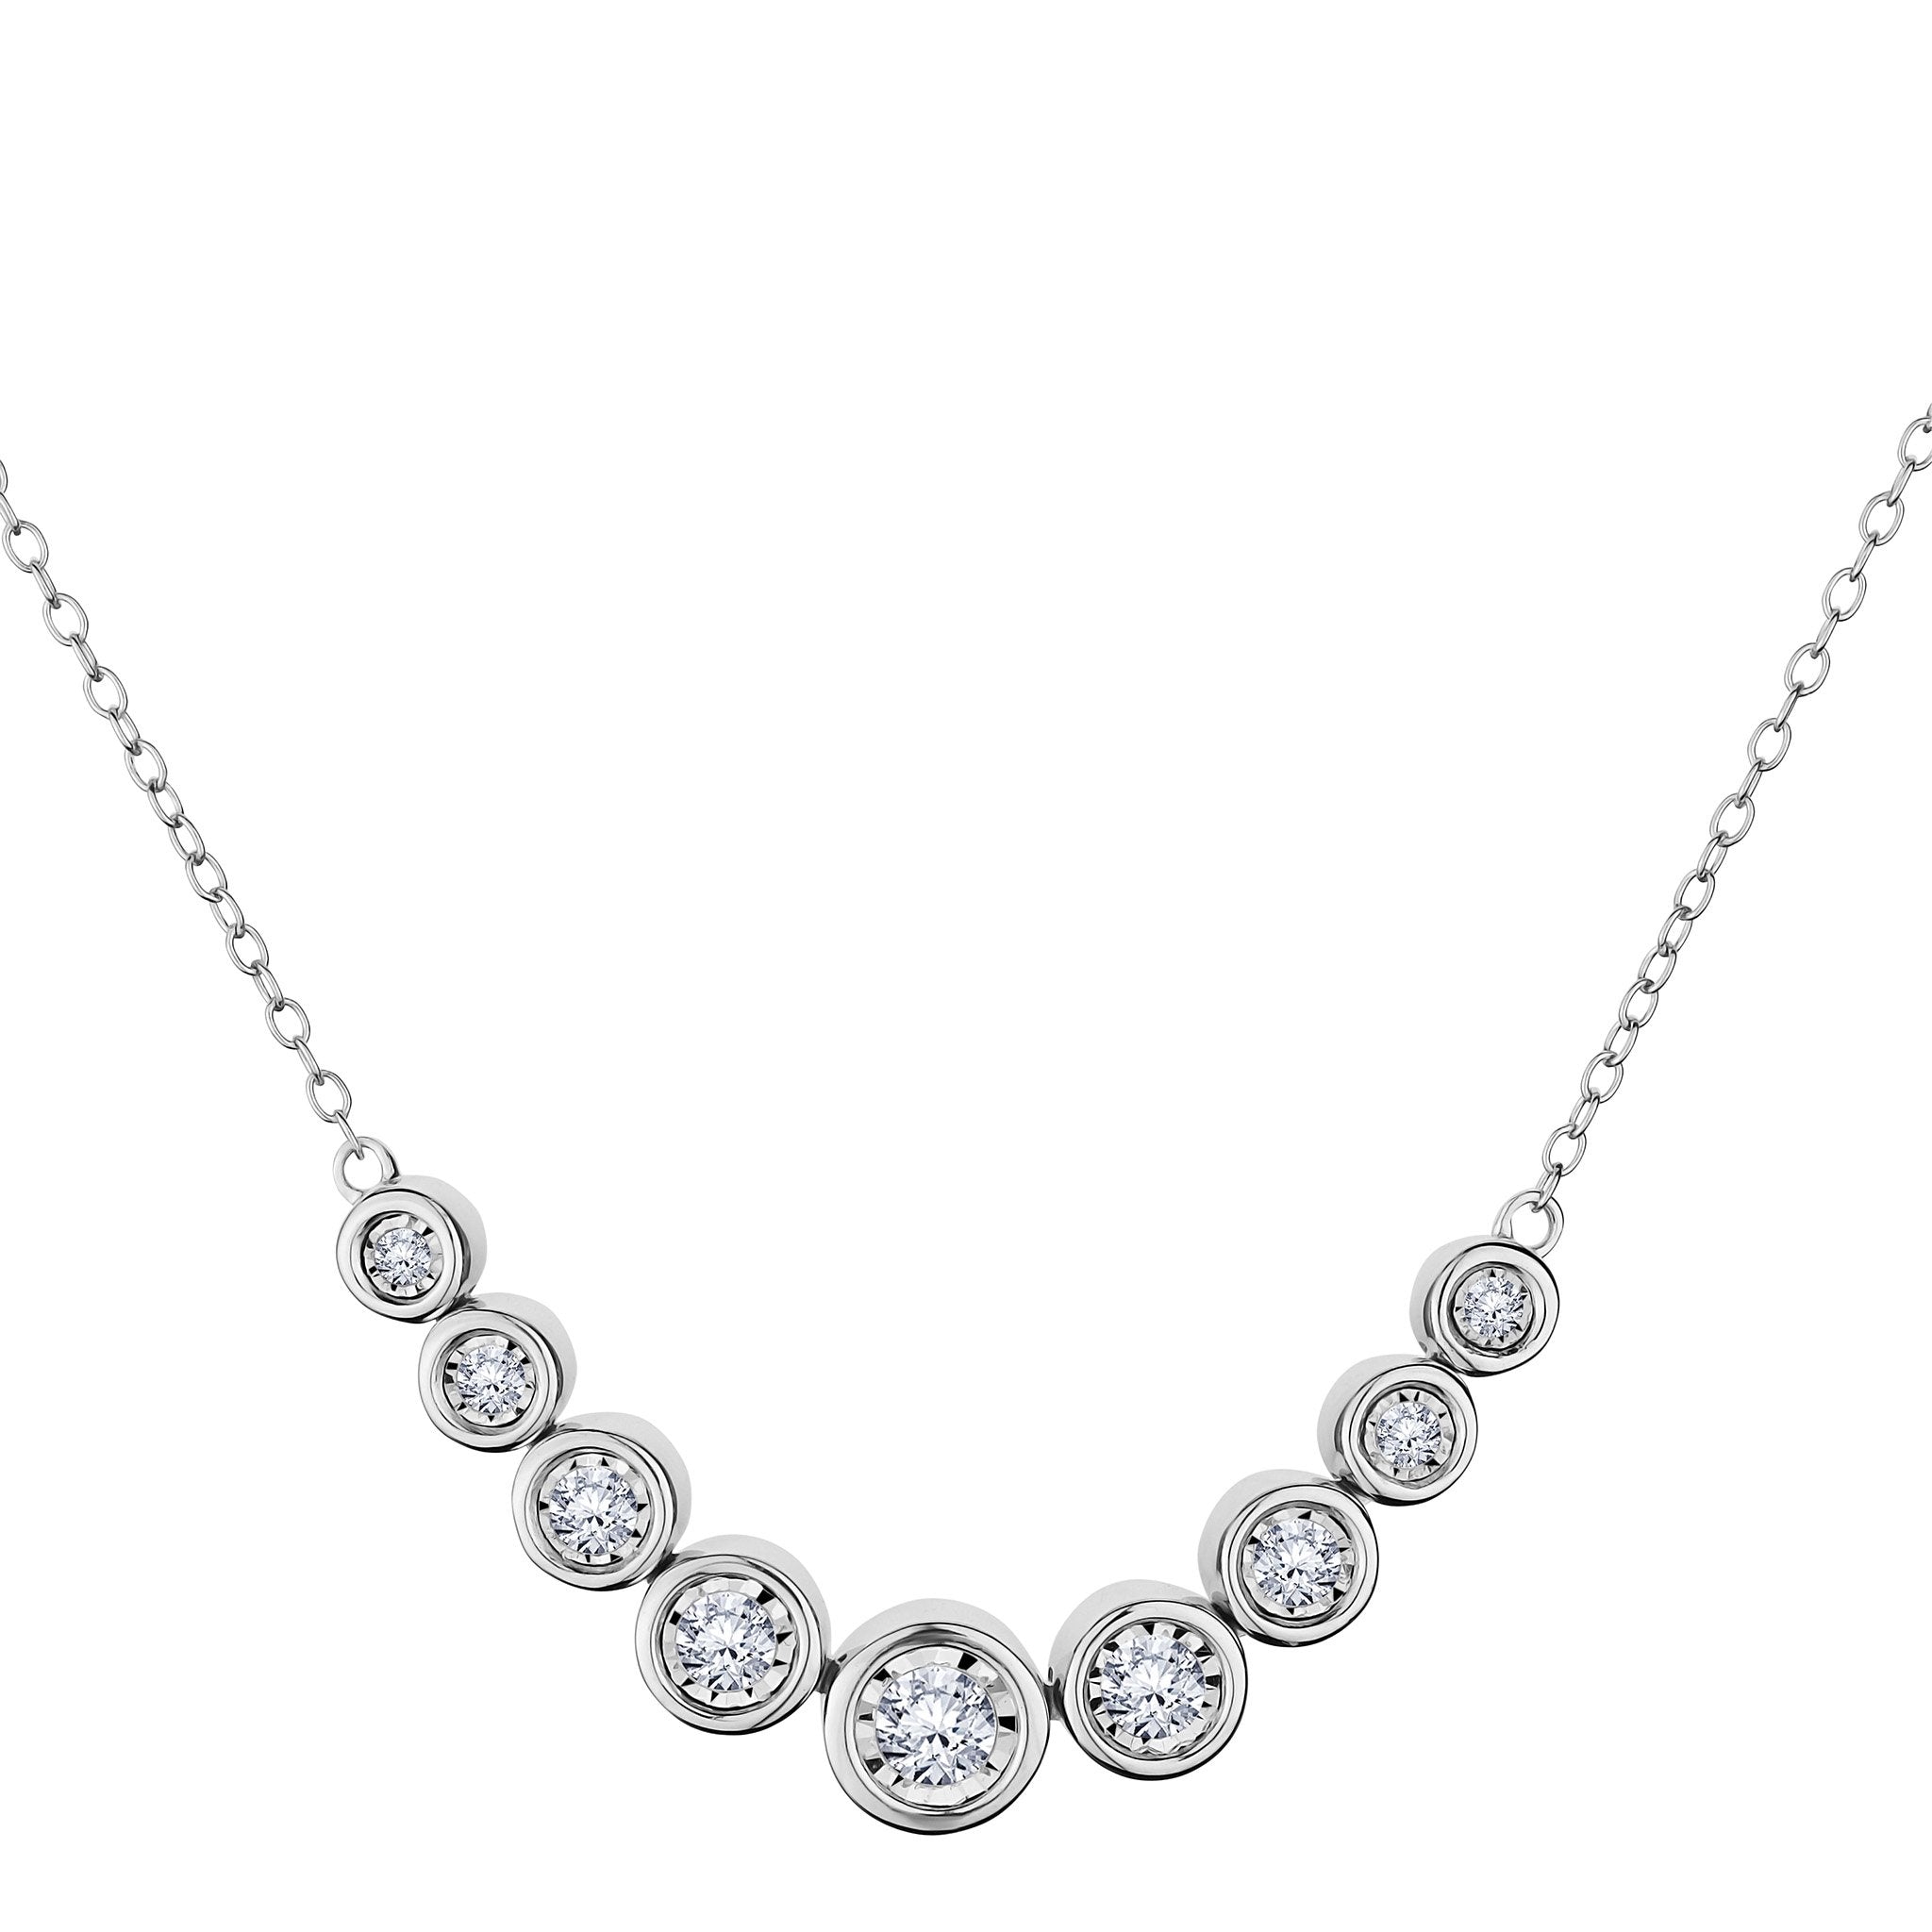 .50 Carat Diamond Necklace,  10kt White Gold. Necklaces and Pendants. Griffin Jewellery Designs. 